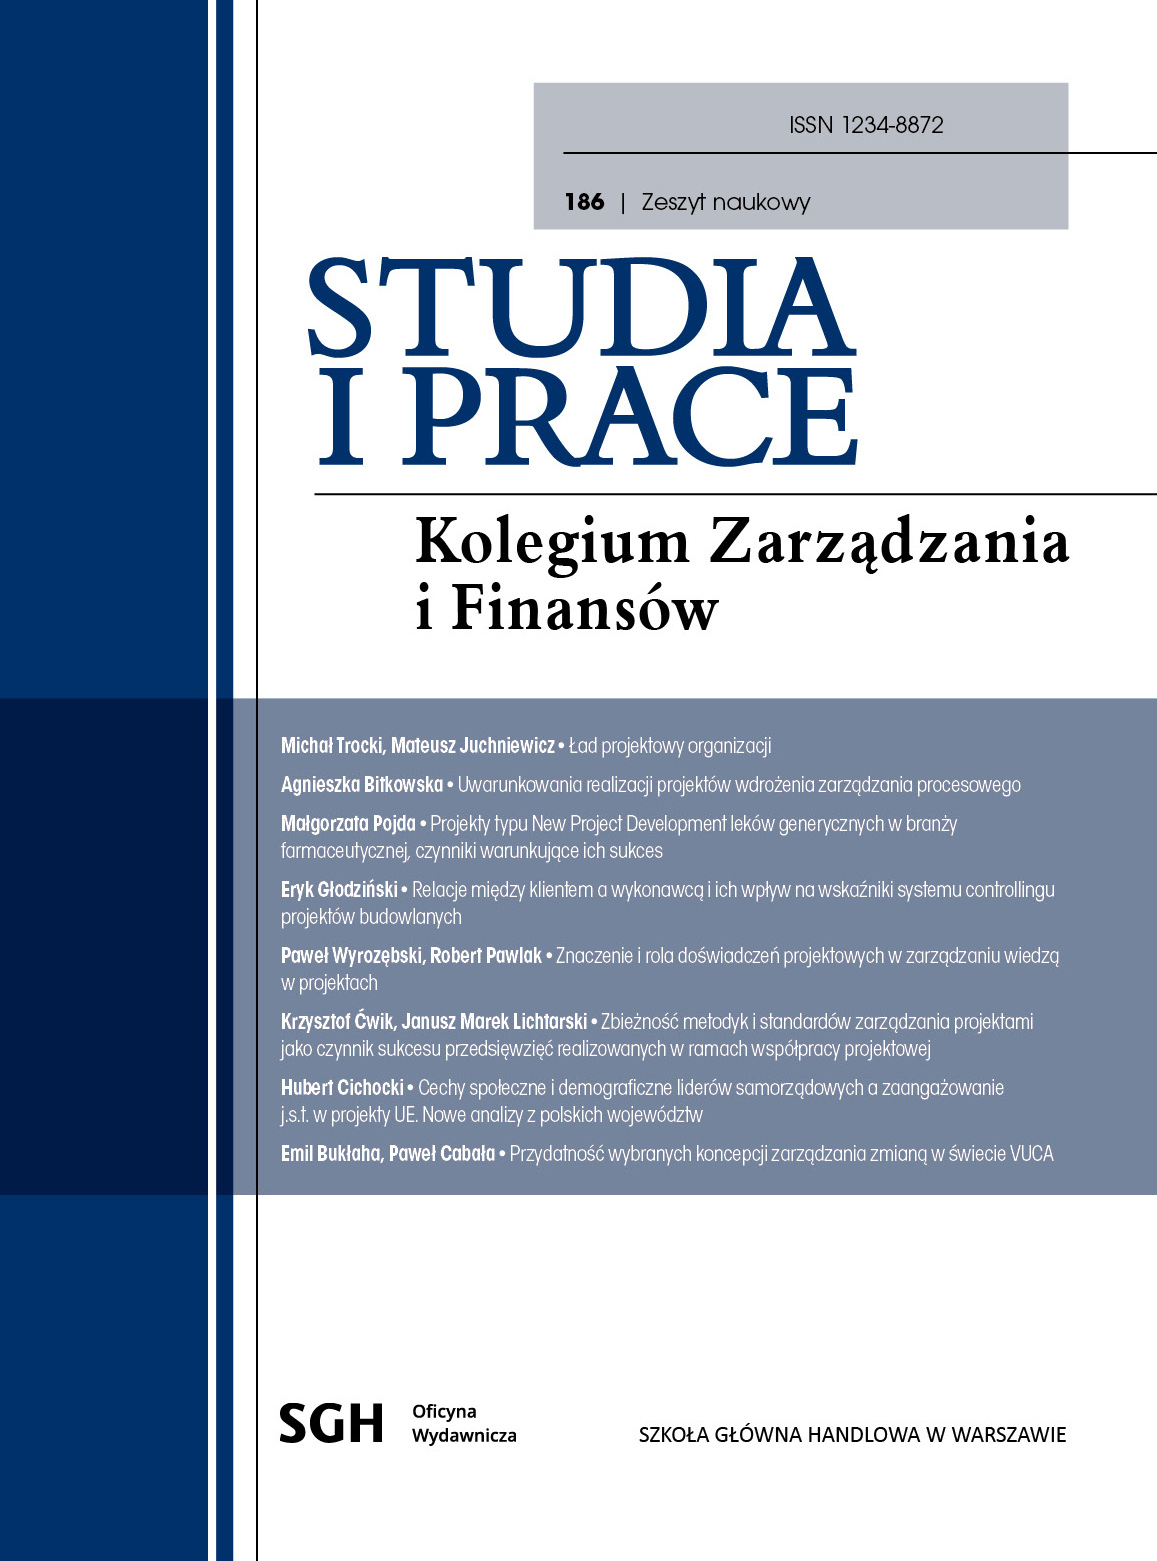 Project governance of the organization Cover Image